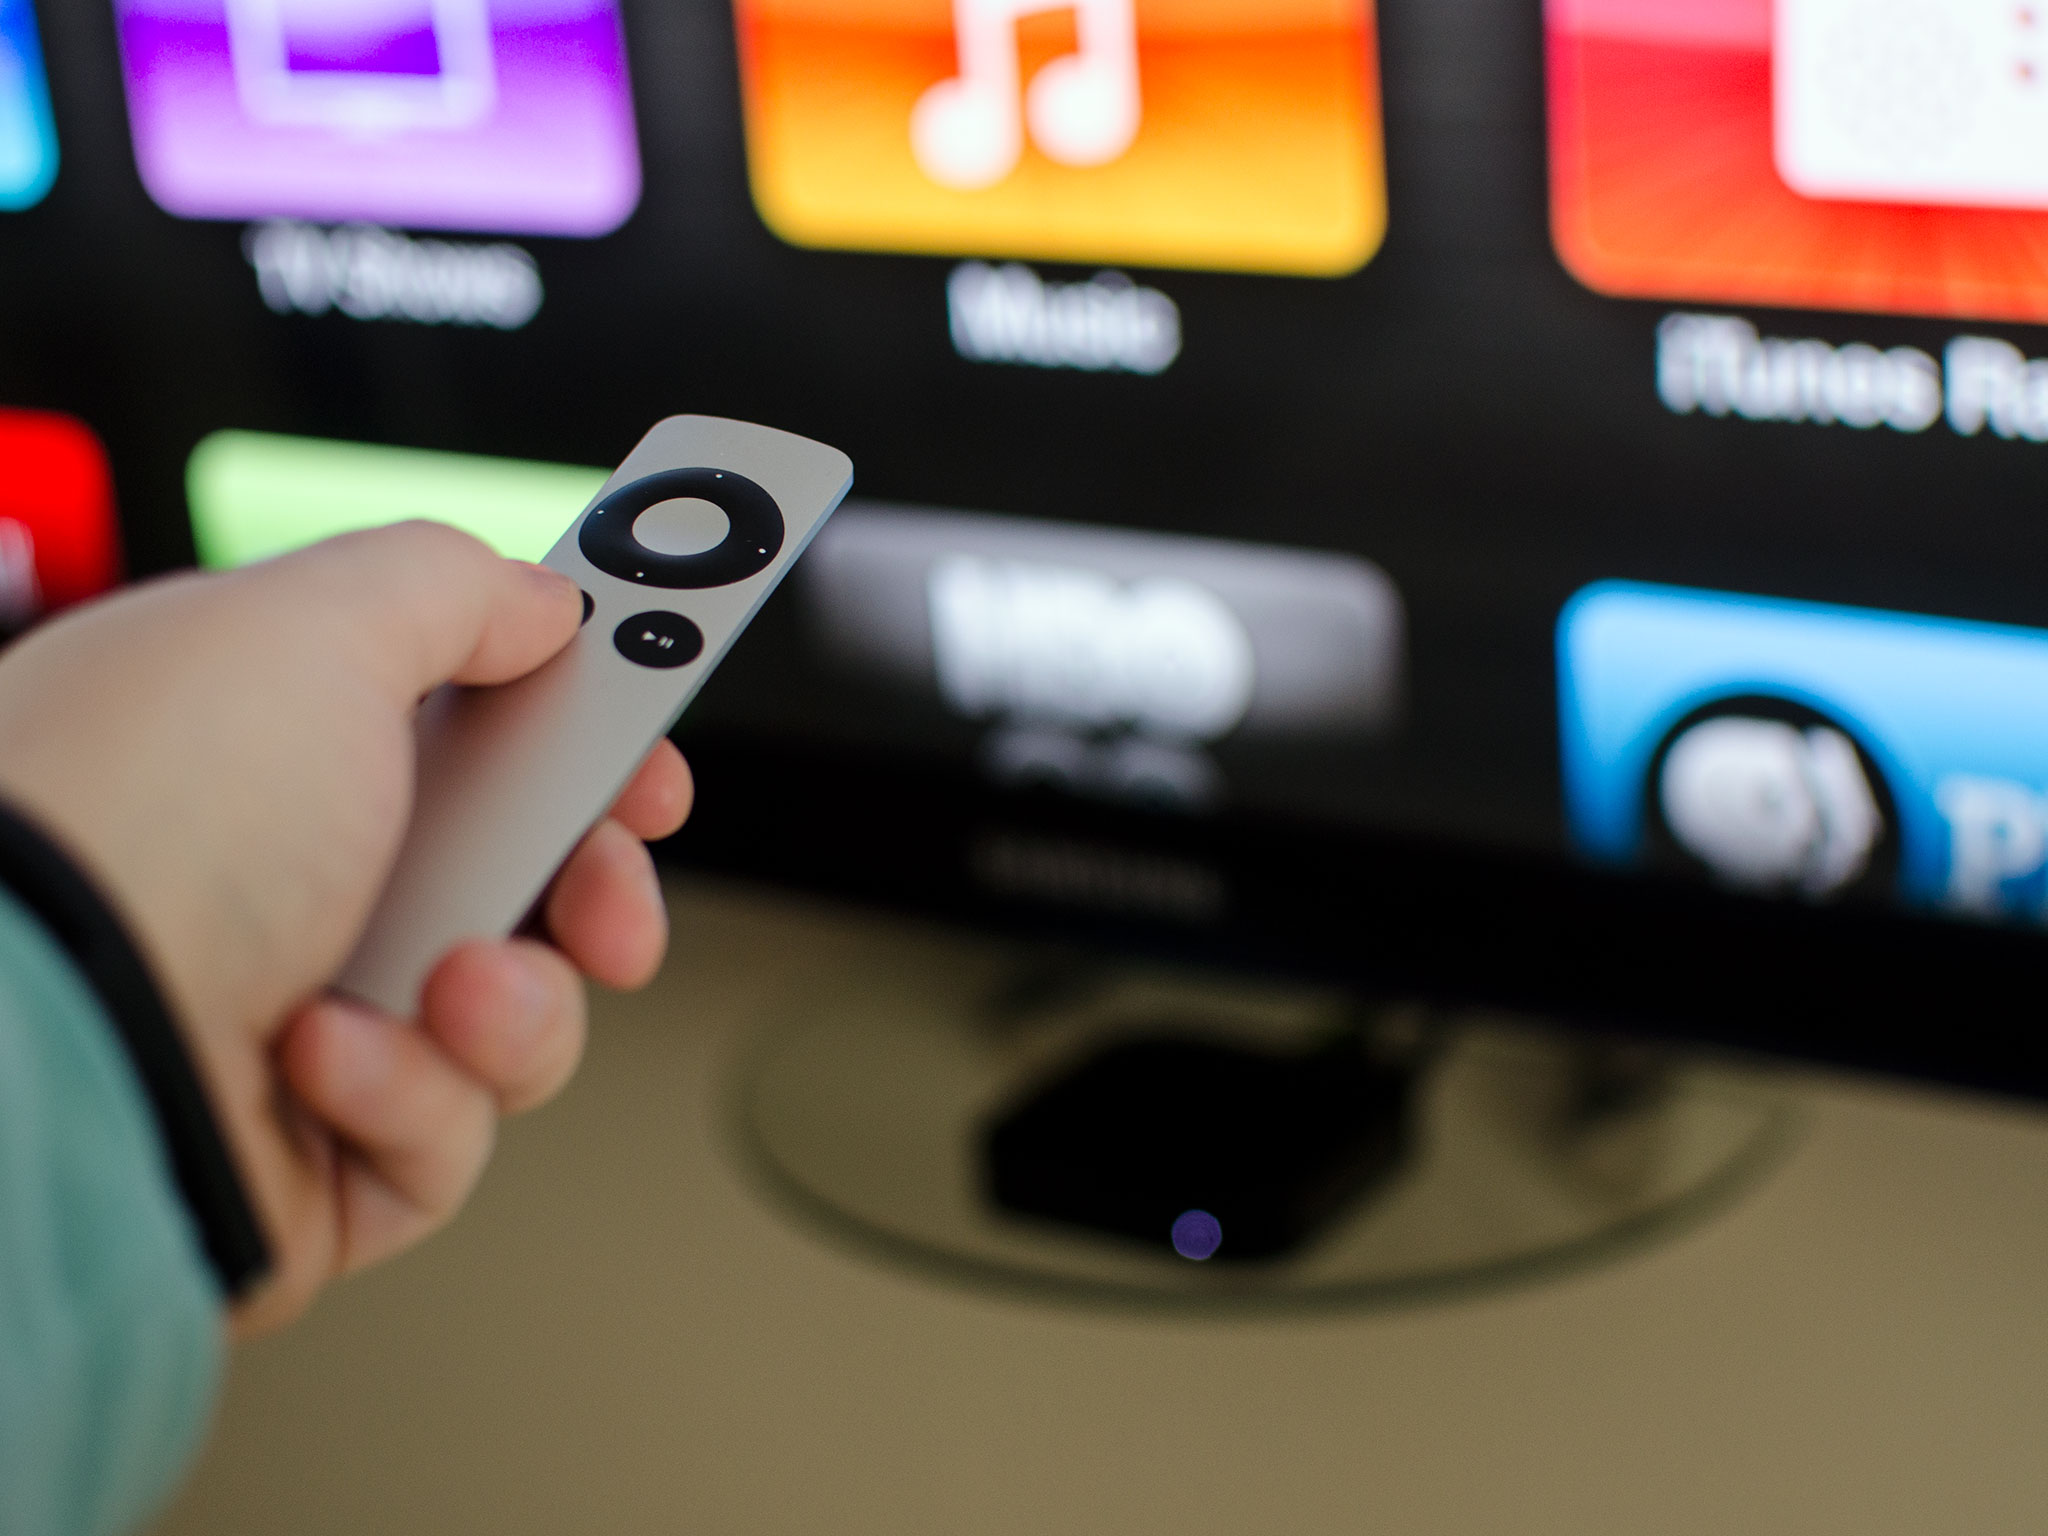 Top 5 shortcuts you need to know when using your Apple TV remote